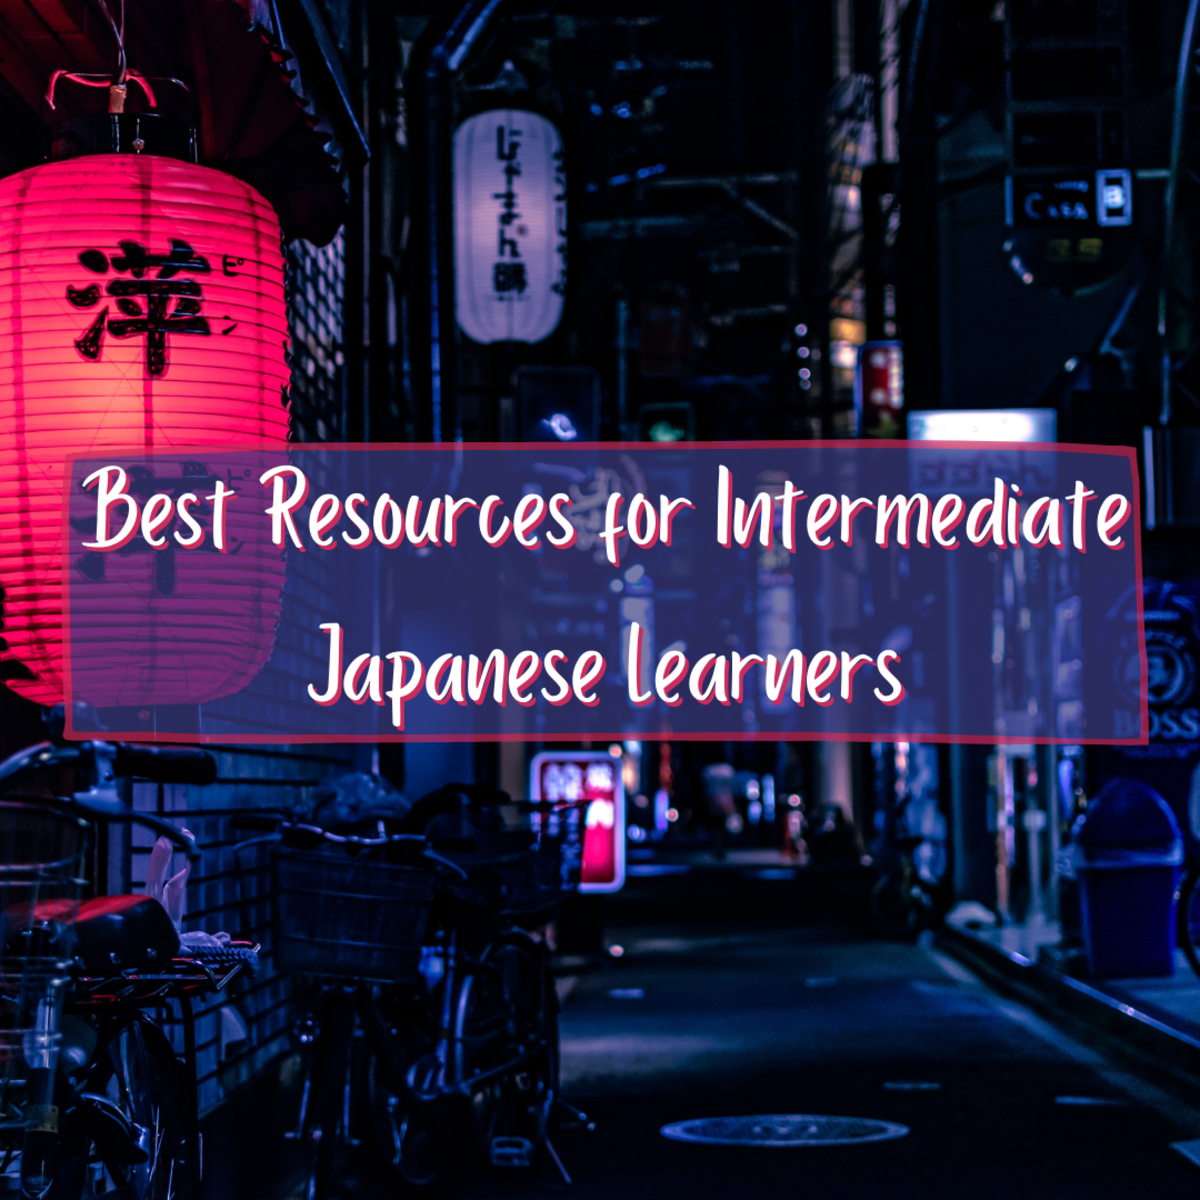 Best Resources for Intermediate Japanese Learners